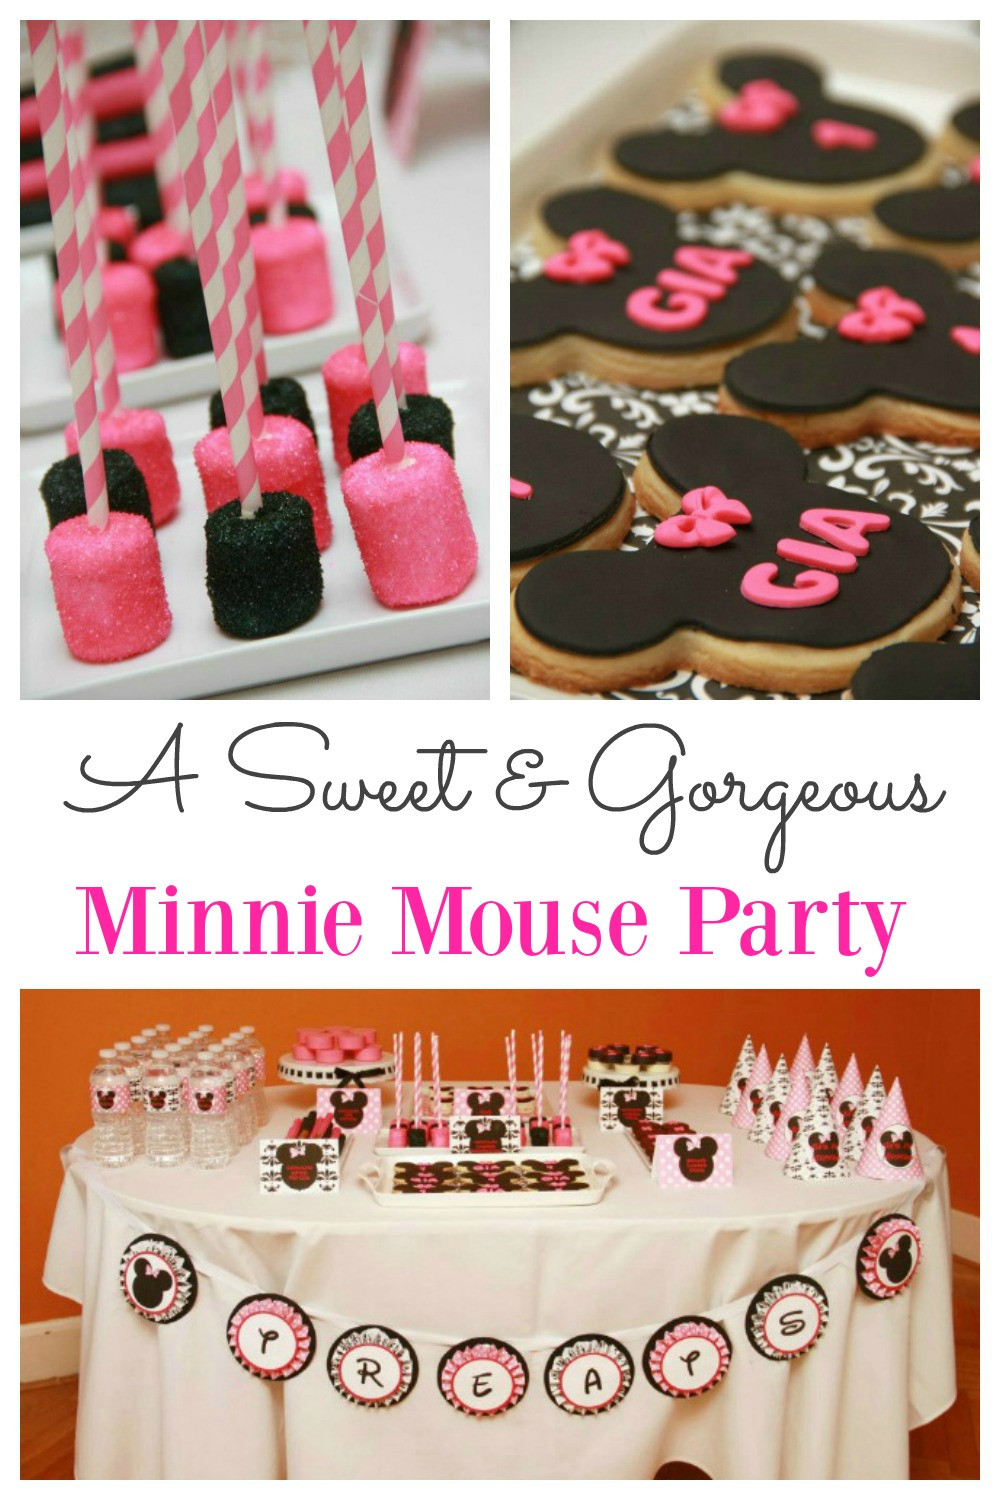 Ideas For A Minnie Mouse Birthday Party
 Minnie Mouse Party